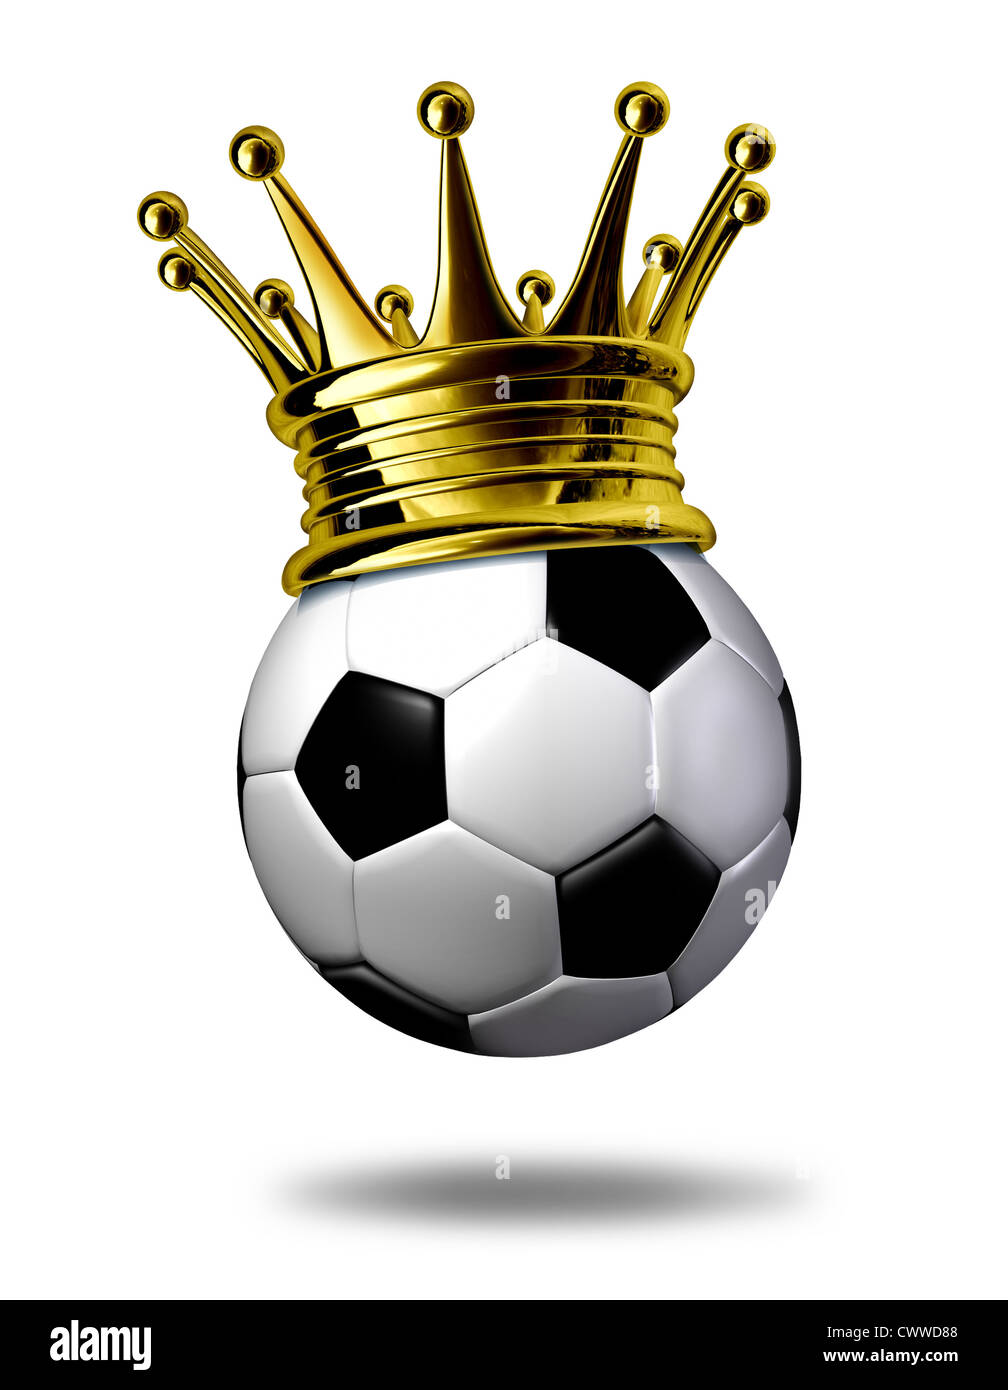 Soccer champion symbol represented by a golden crown on a black and white soccer ball or as called in Europe a football representing the winning of a tournament or game. Stock Photo